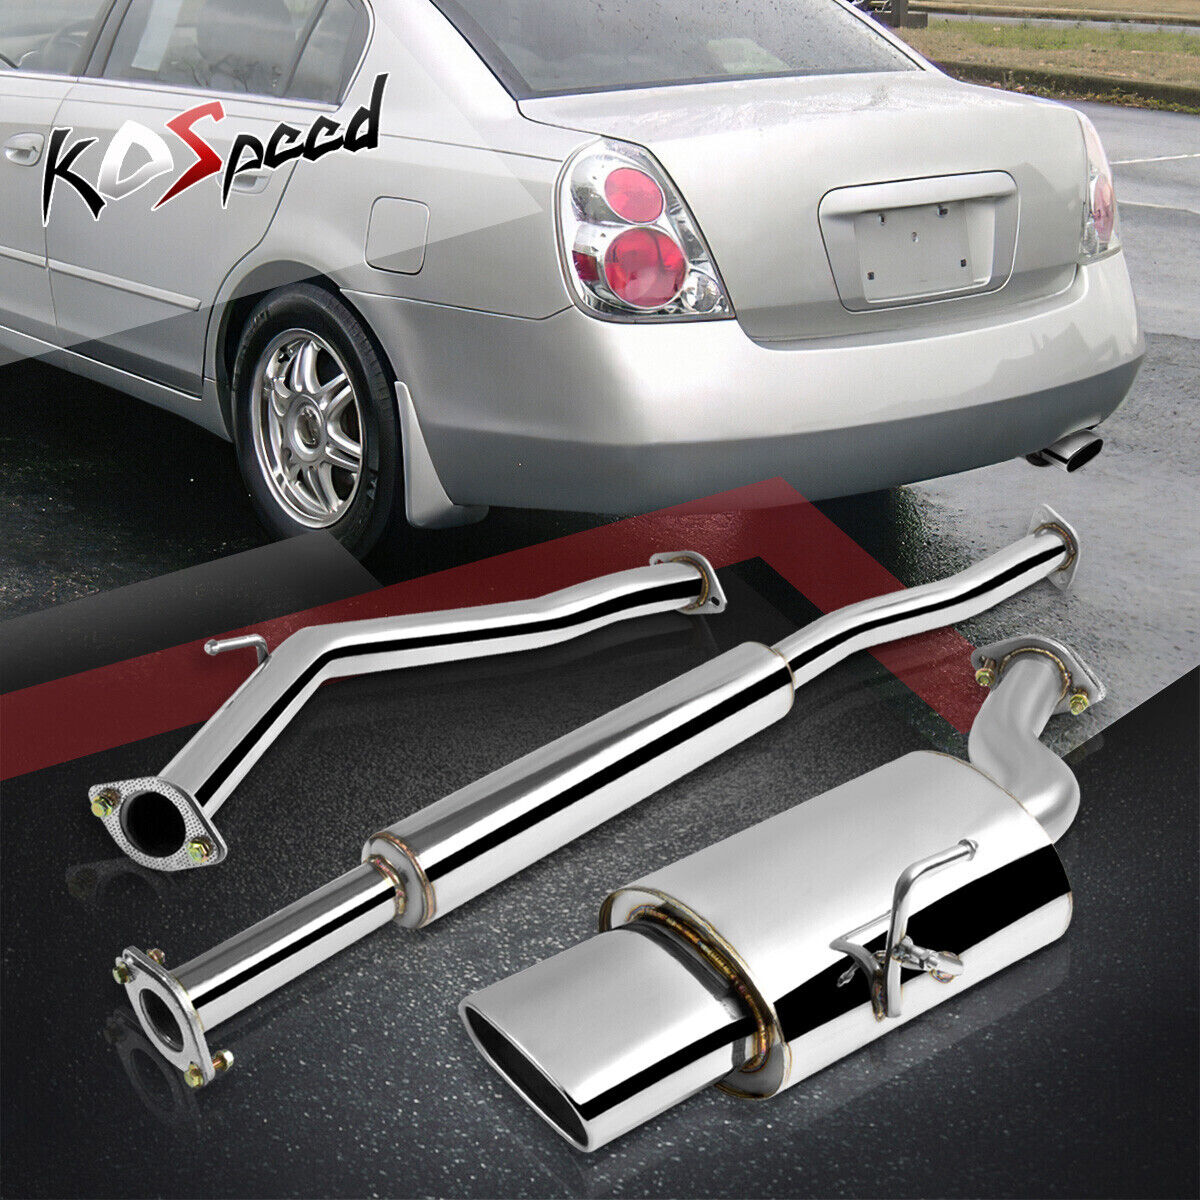 STAINLESS STEEL PERFORMANCE CATBACK EXHAUST SYSTEM FOR 02-06 NISSAN ALTIMA 2.5L